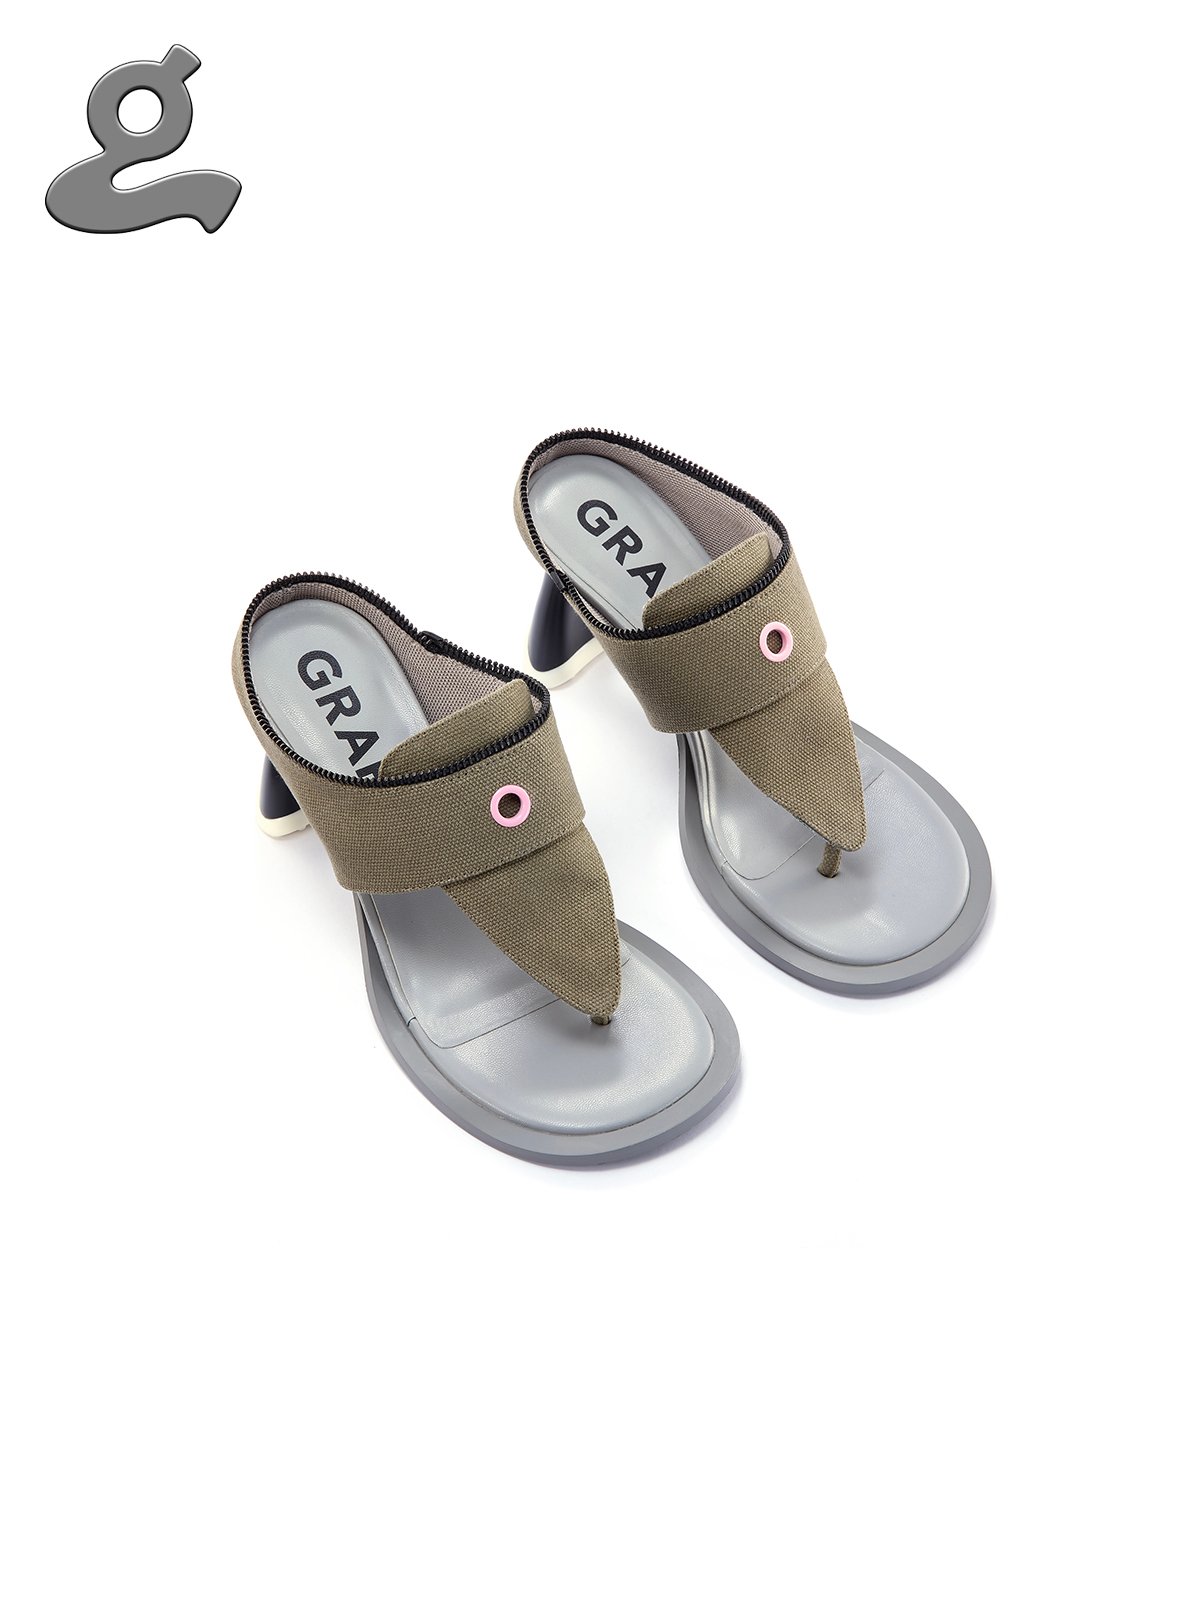 Image of [Pre-Order] Detachable Boot Sandals